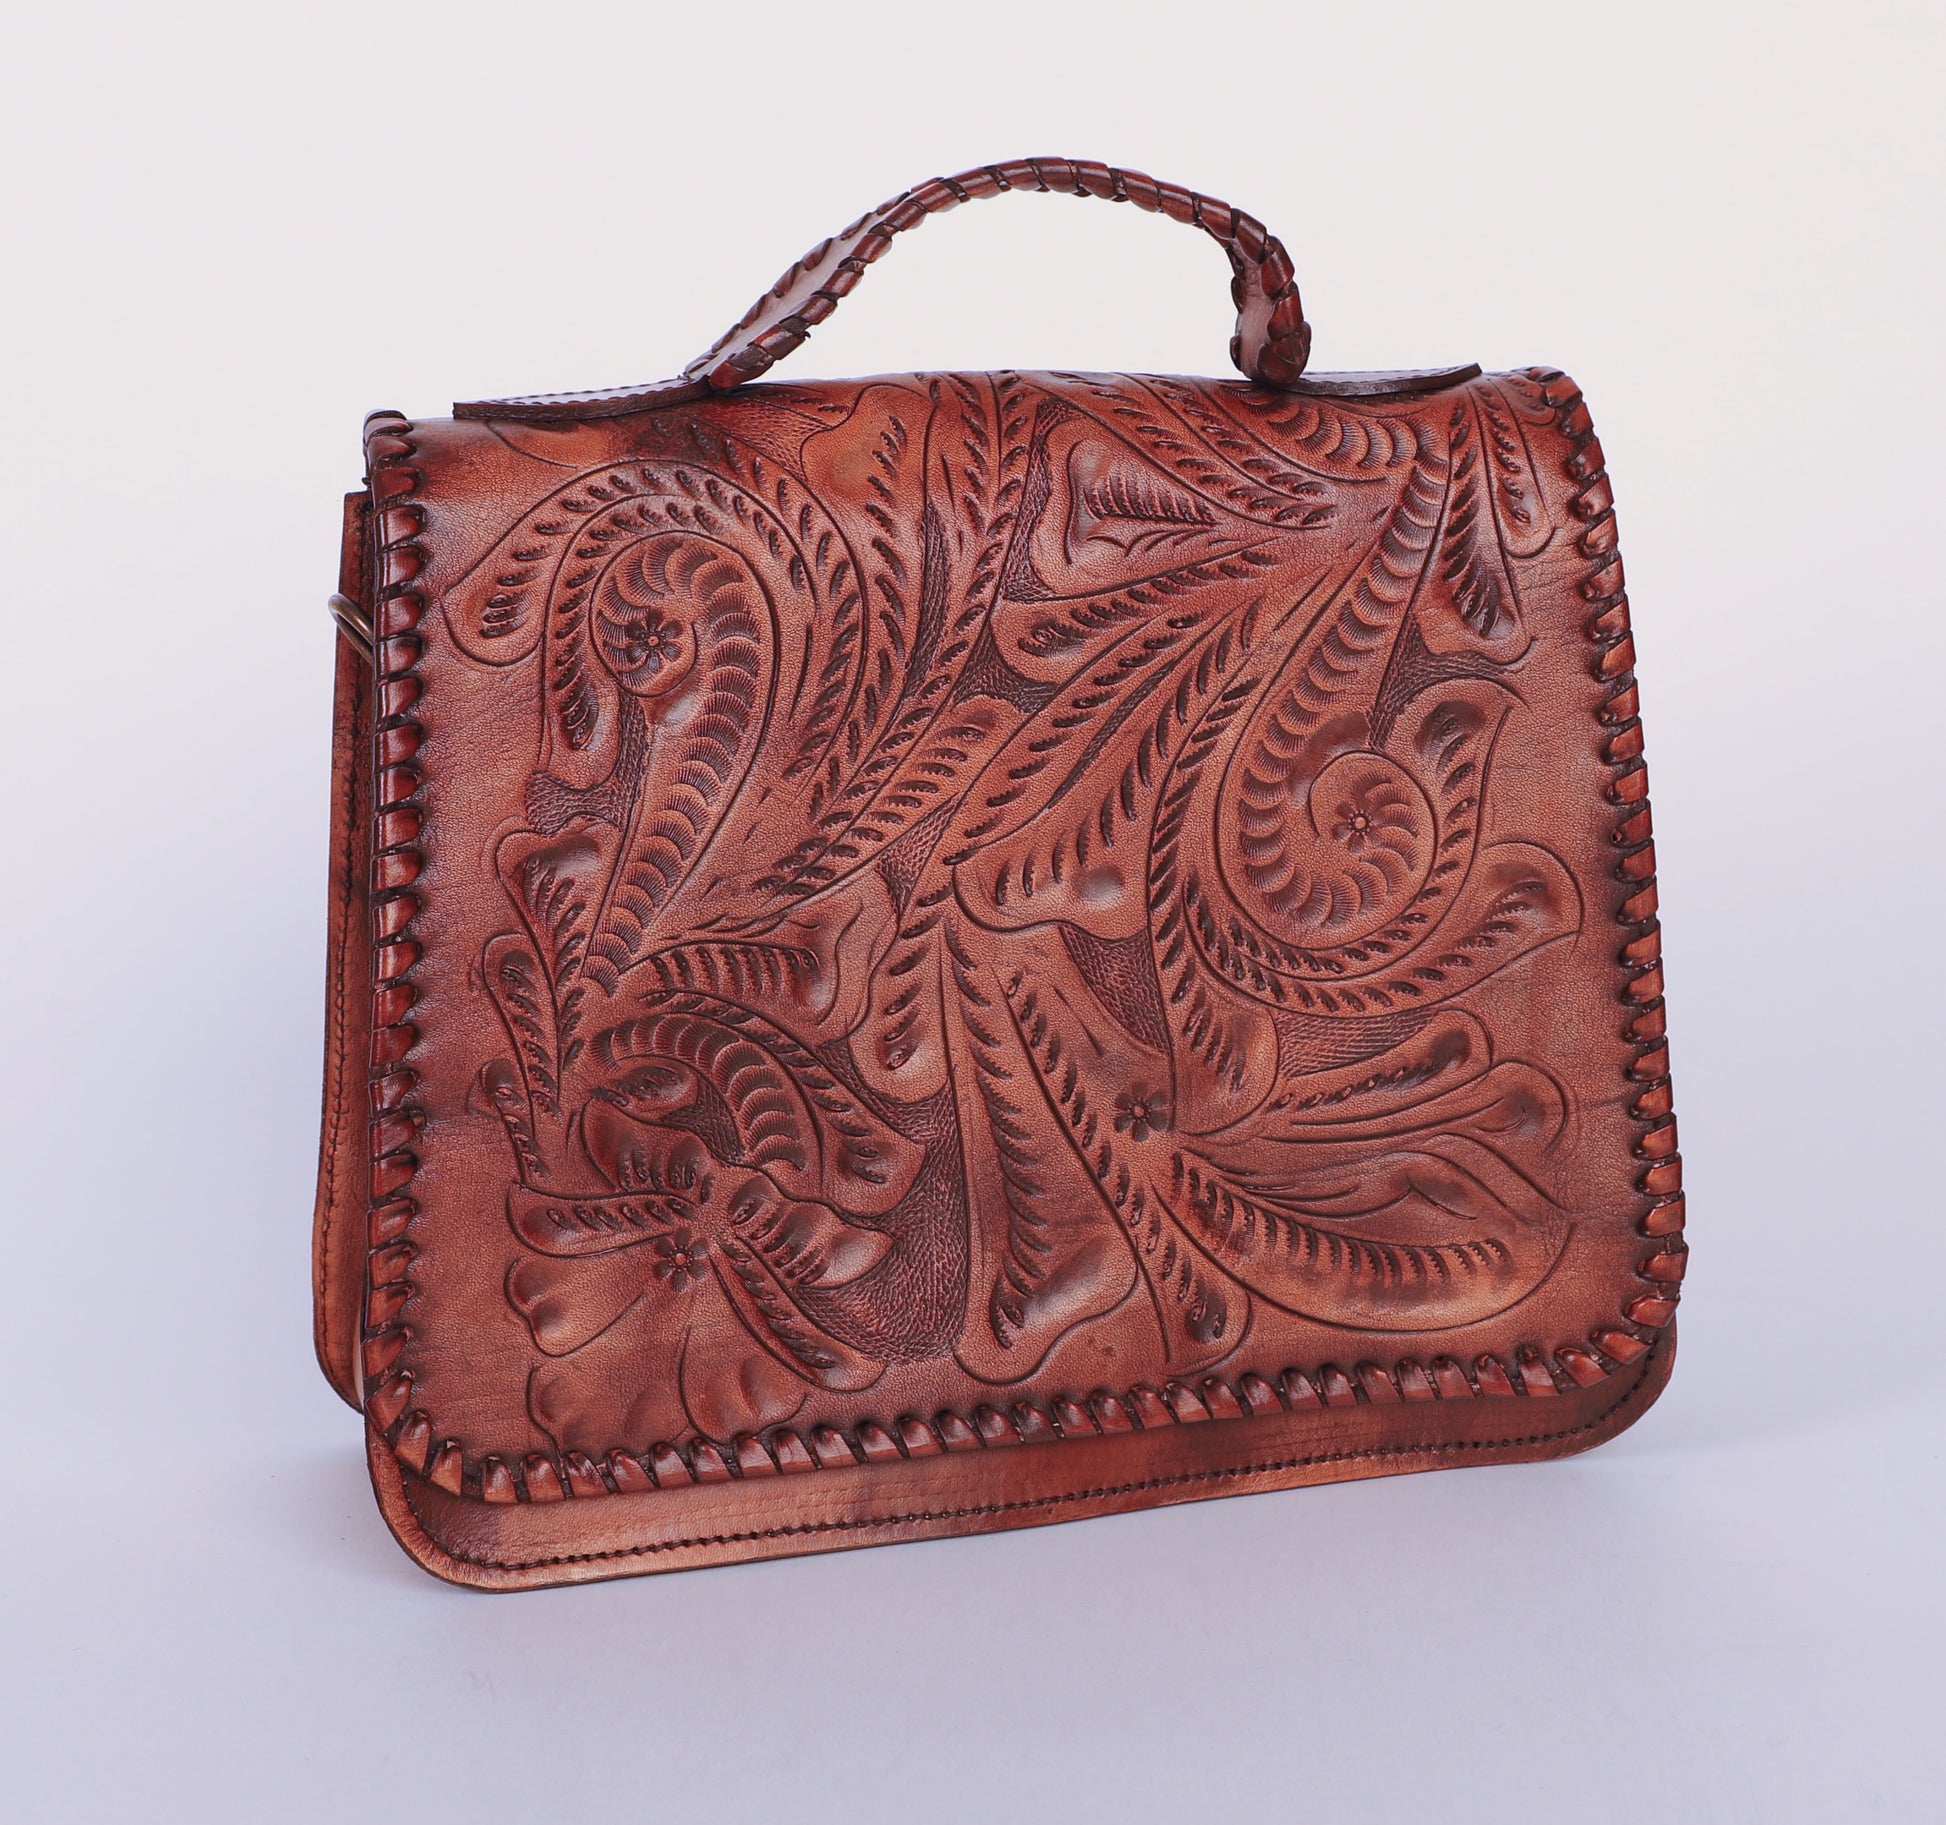 Medium-sized full leather handbag with a traditional mexican etching design on the upper flap. Braided handle on top. Fully lined with suede.  Front view in popular color camel. 